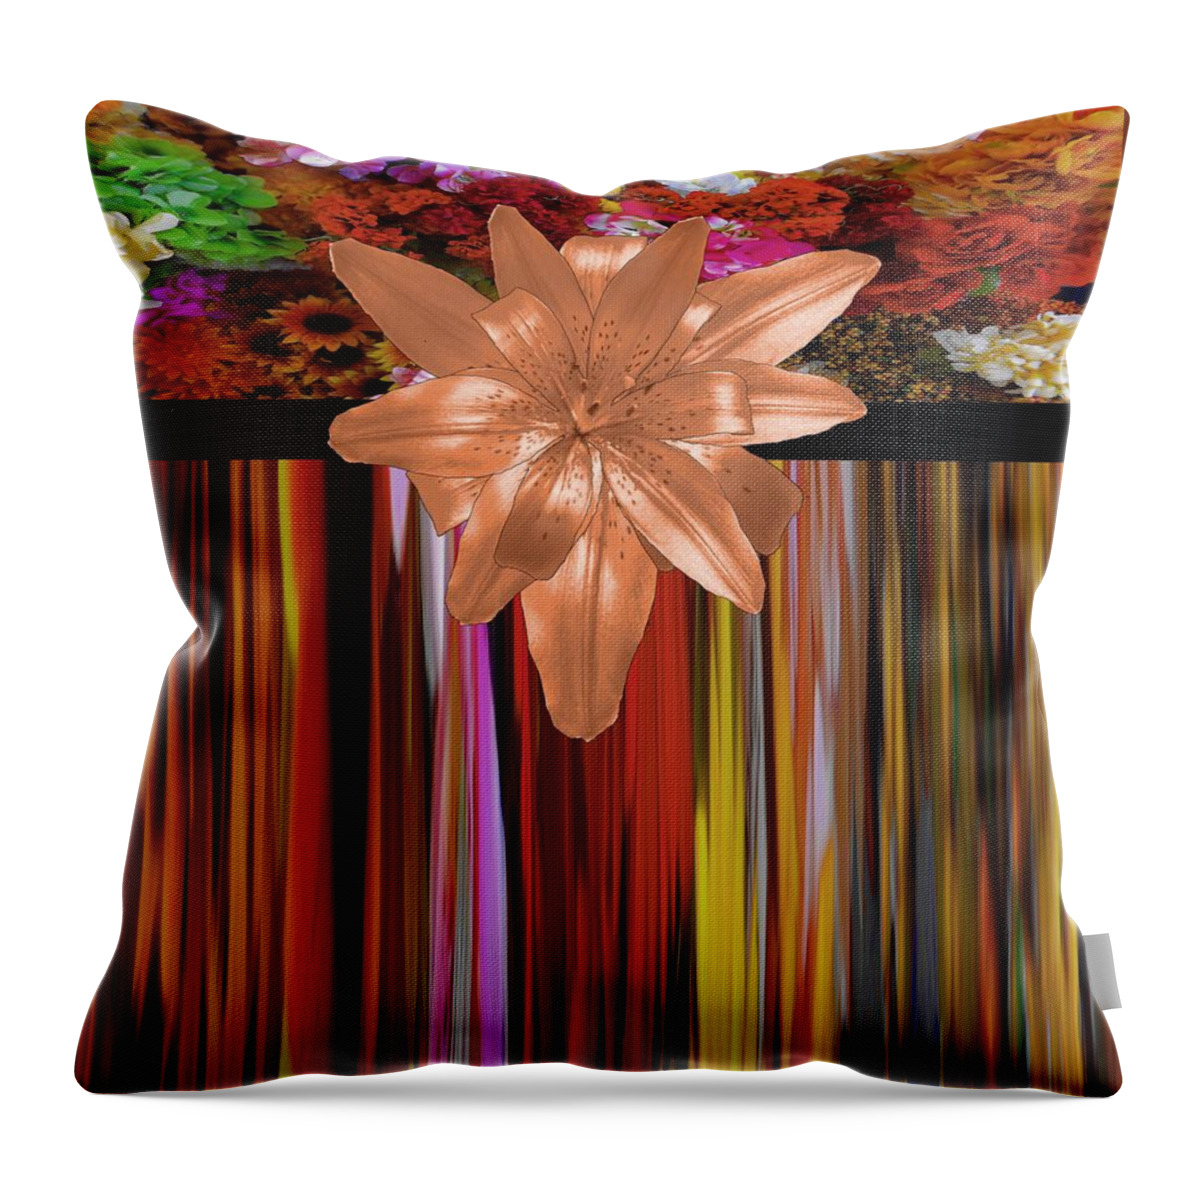 Autumn Throw Pillow featuring the mixed media Autumn Copper Lily Floral Design by Delynn Addams